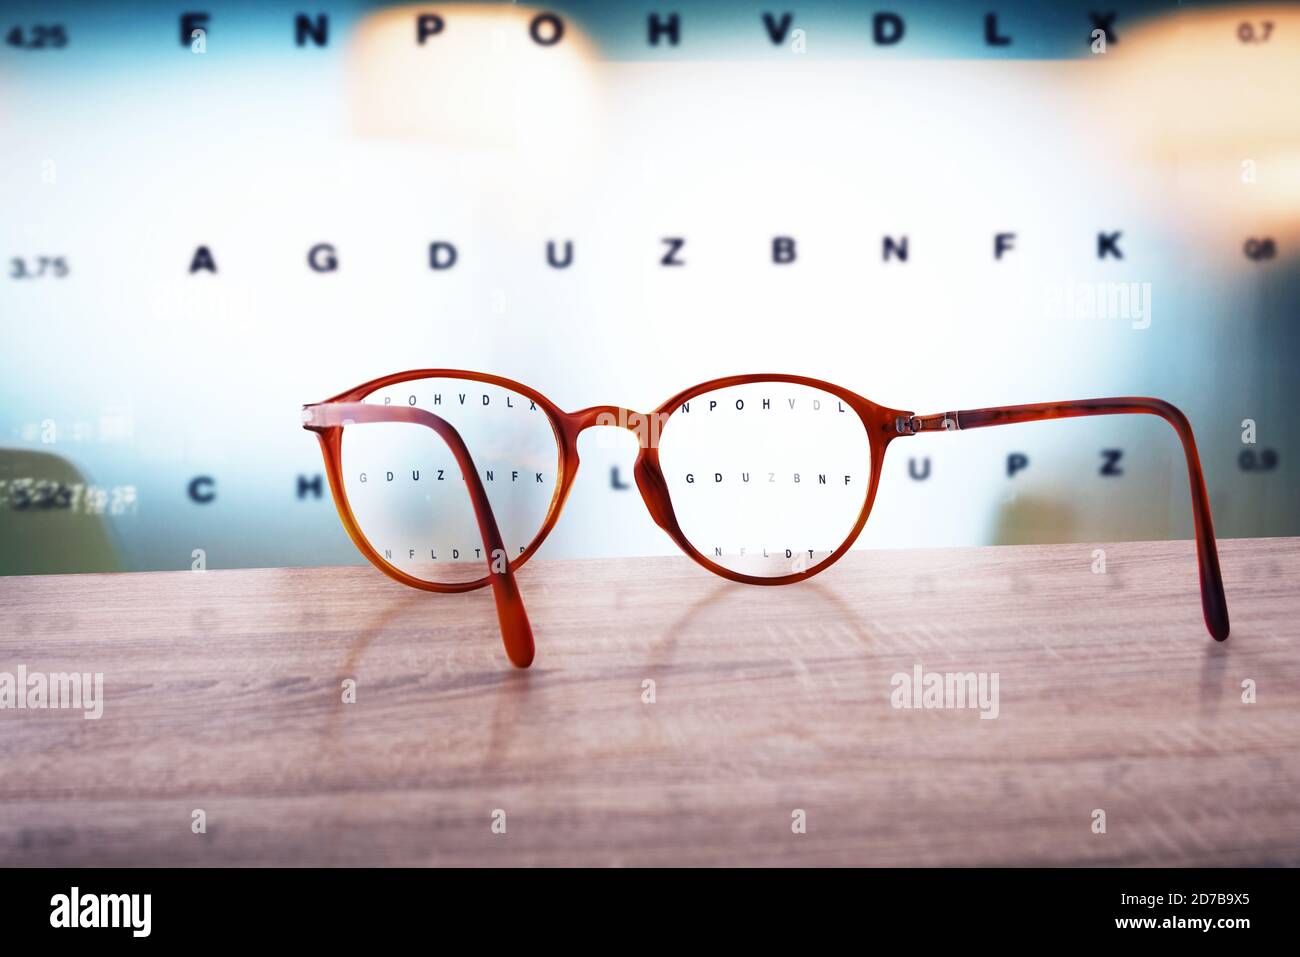 Glasses that correct eyesight from blurred to sharp. Stock Photo